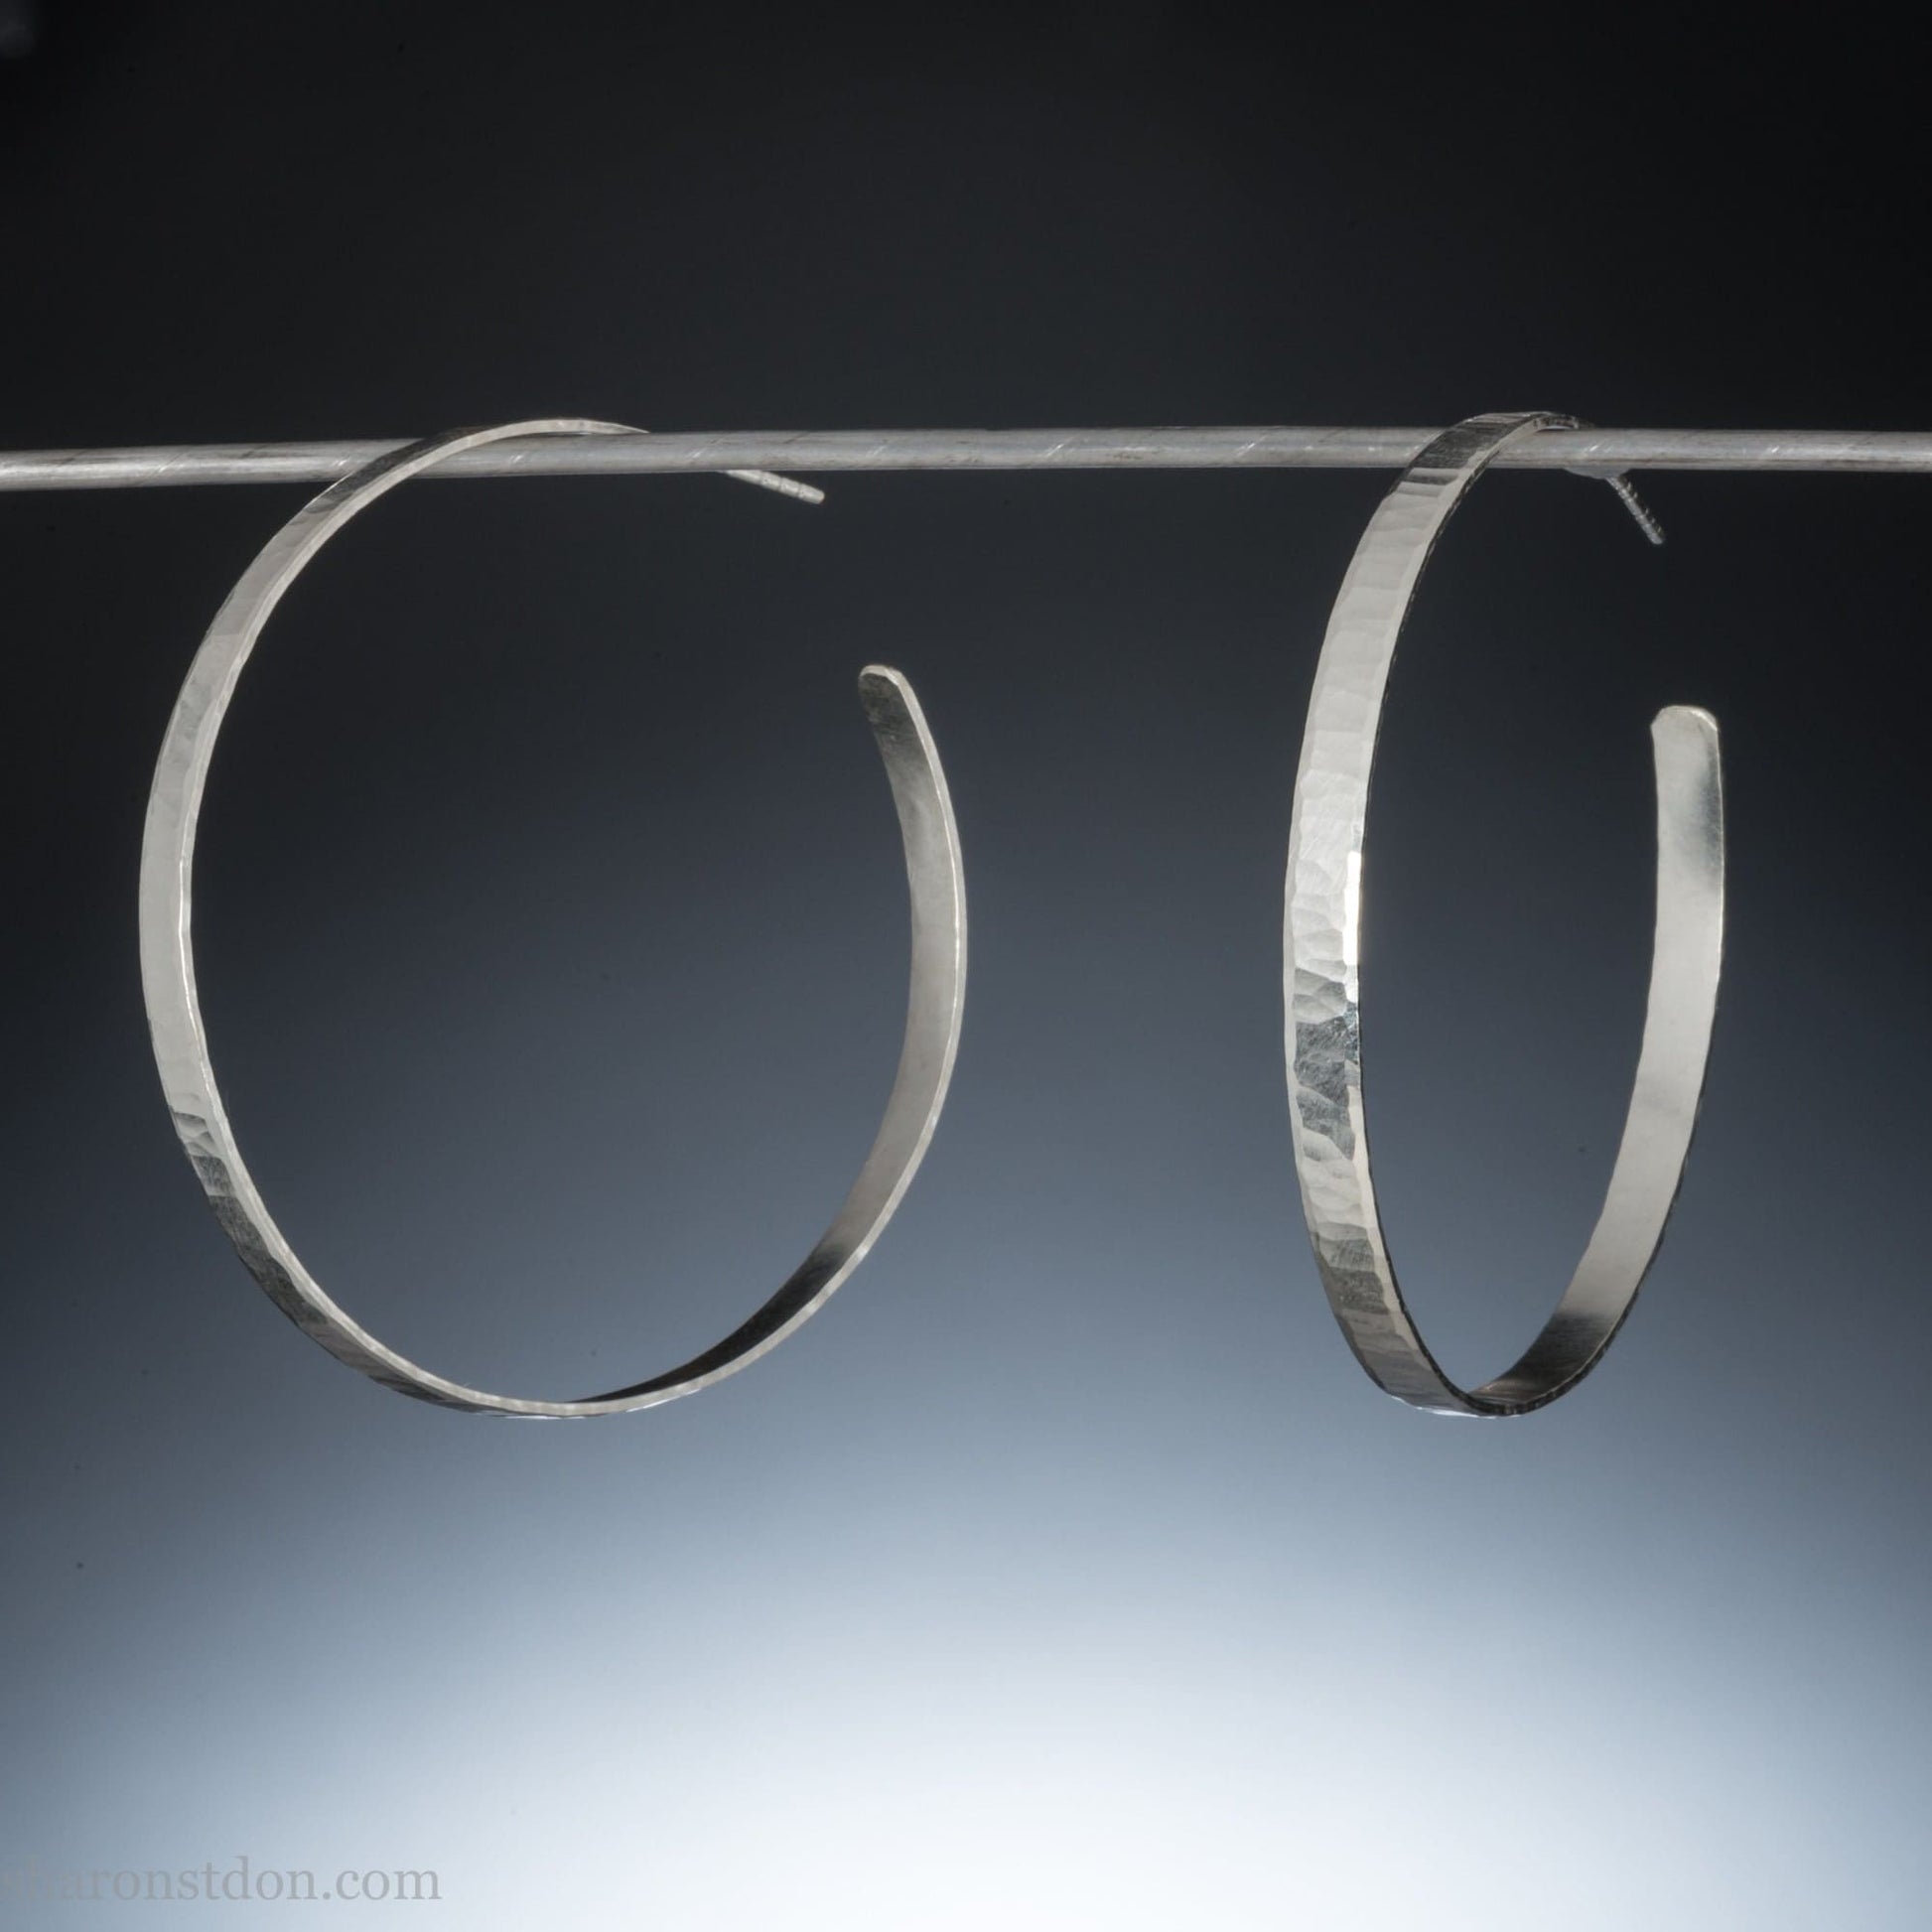 50mm diameter x 5mm, large, wide sterling silver hoop earrings for women. Handmade in North America by Sharon SaintDon. Hammered, wavy, matte texture. Solid silver including silver posts and backs